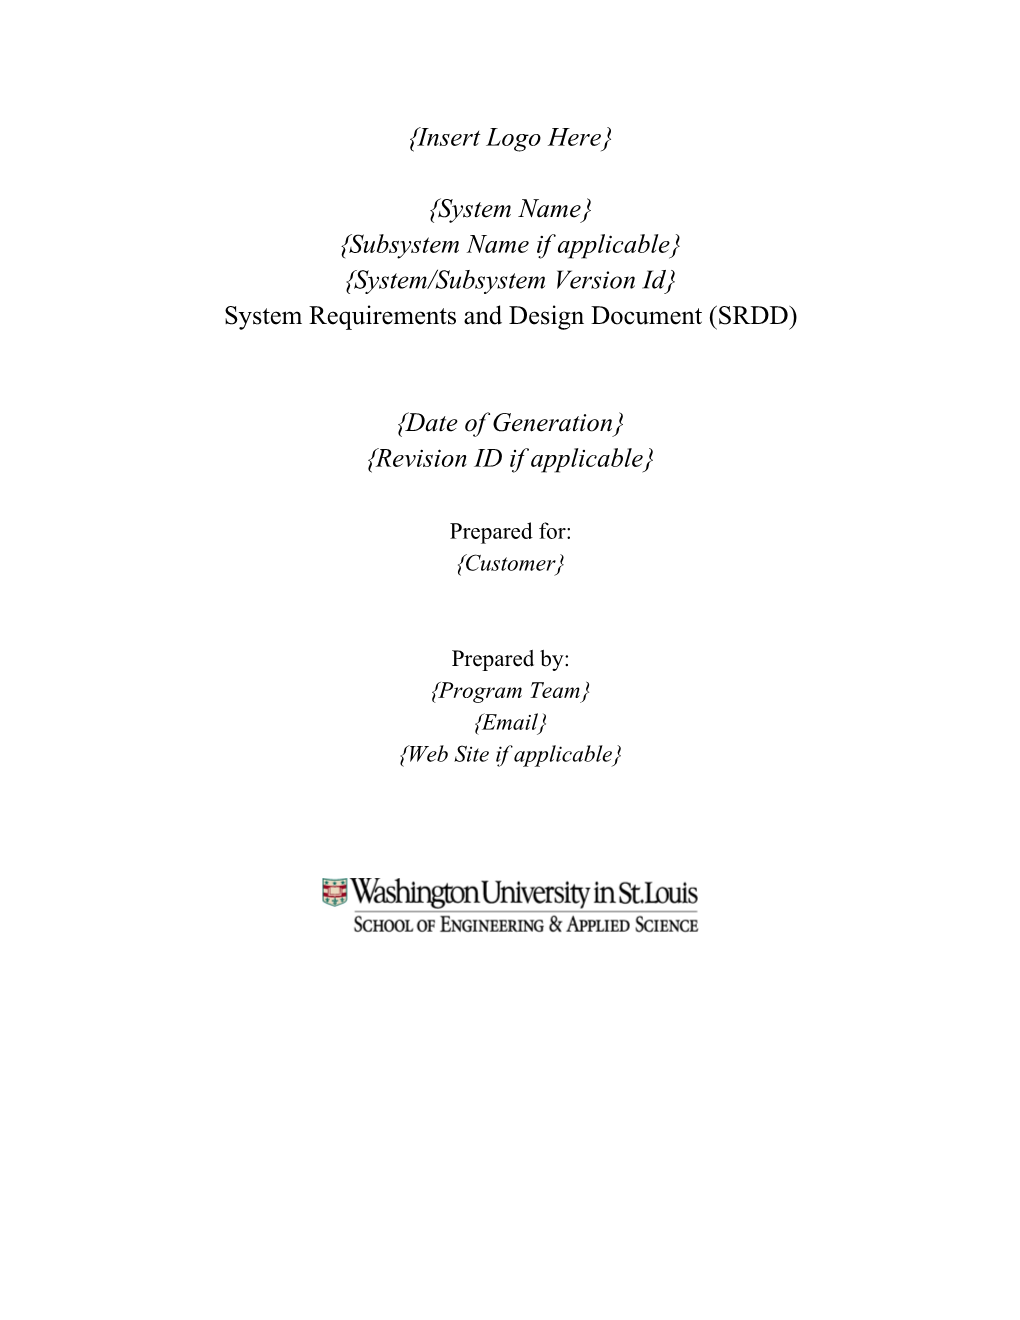 System Requirements and Design Document (SRDD)